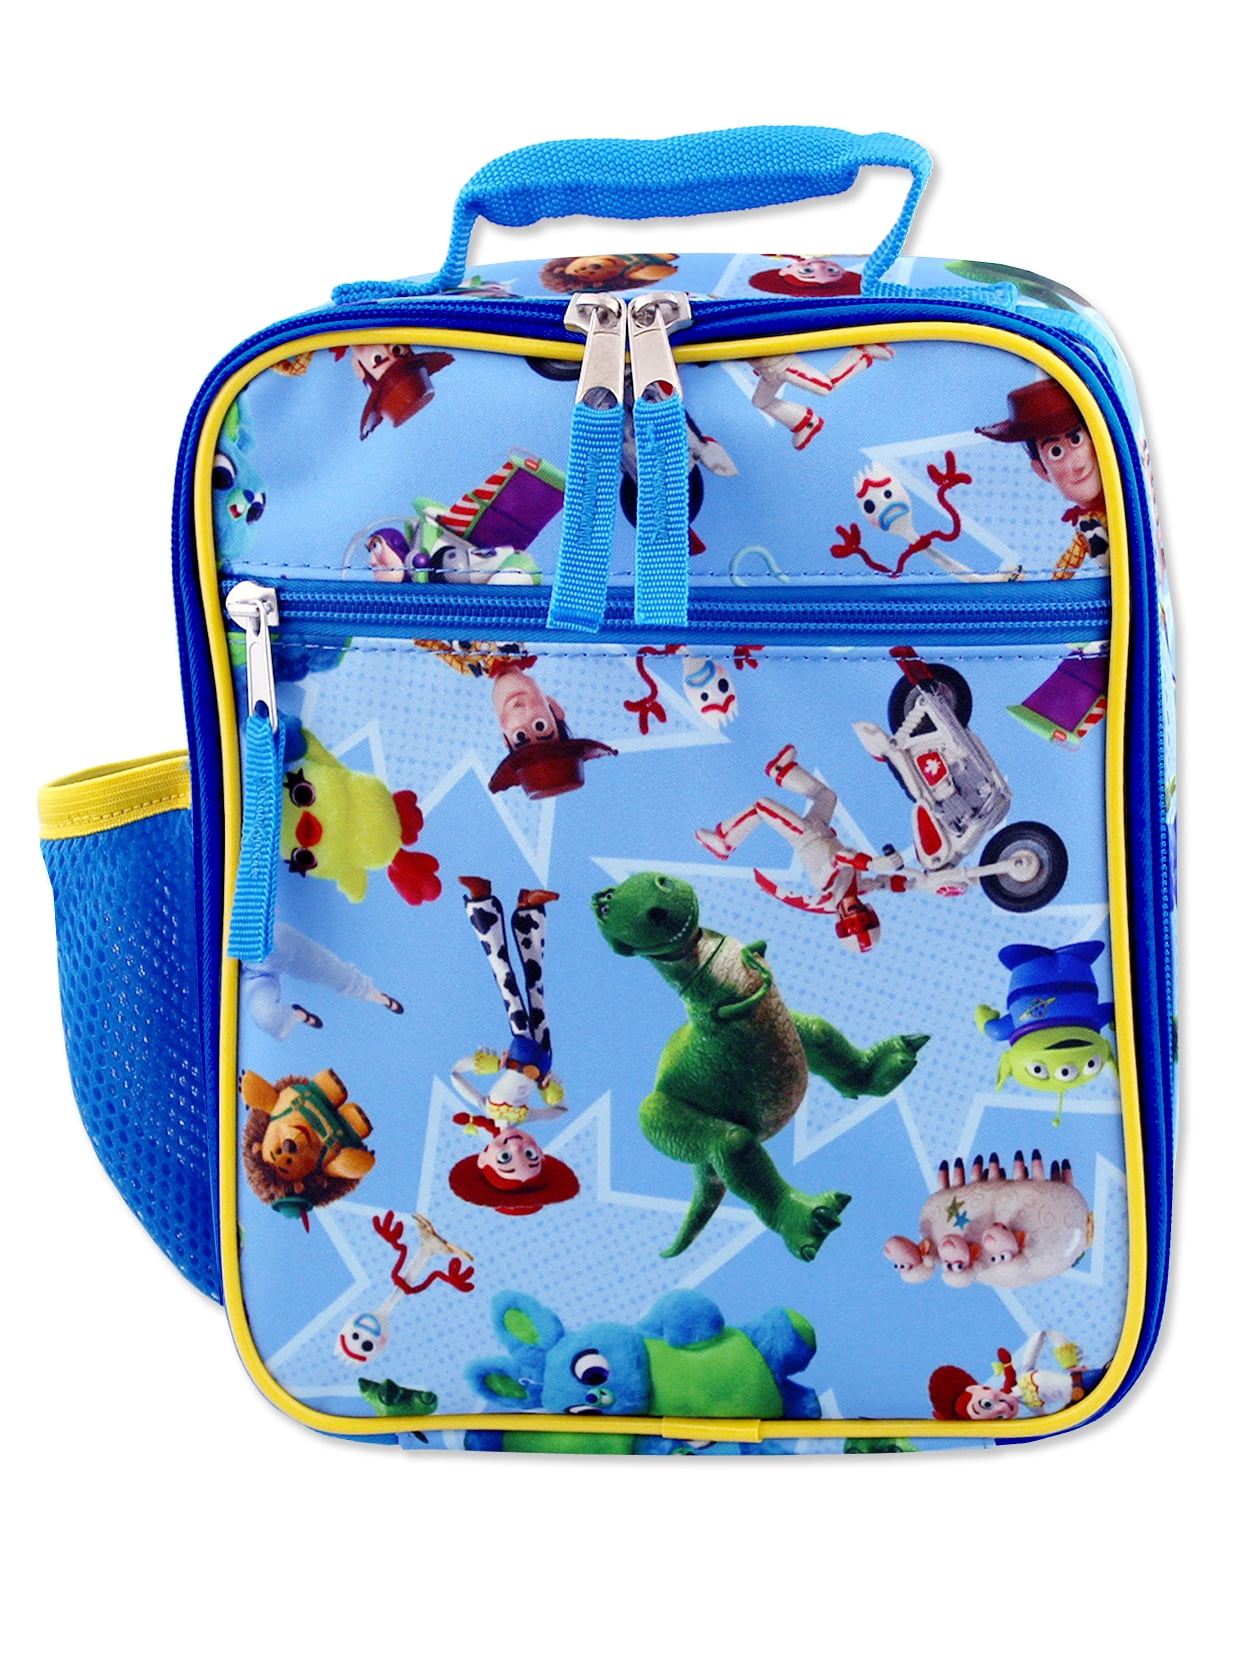 Personalised Kids School Sandwich Lunch Box Insulated Cool Blue Bag For Boys